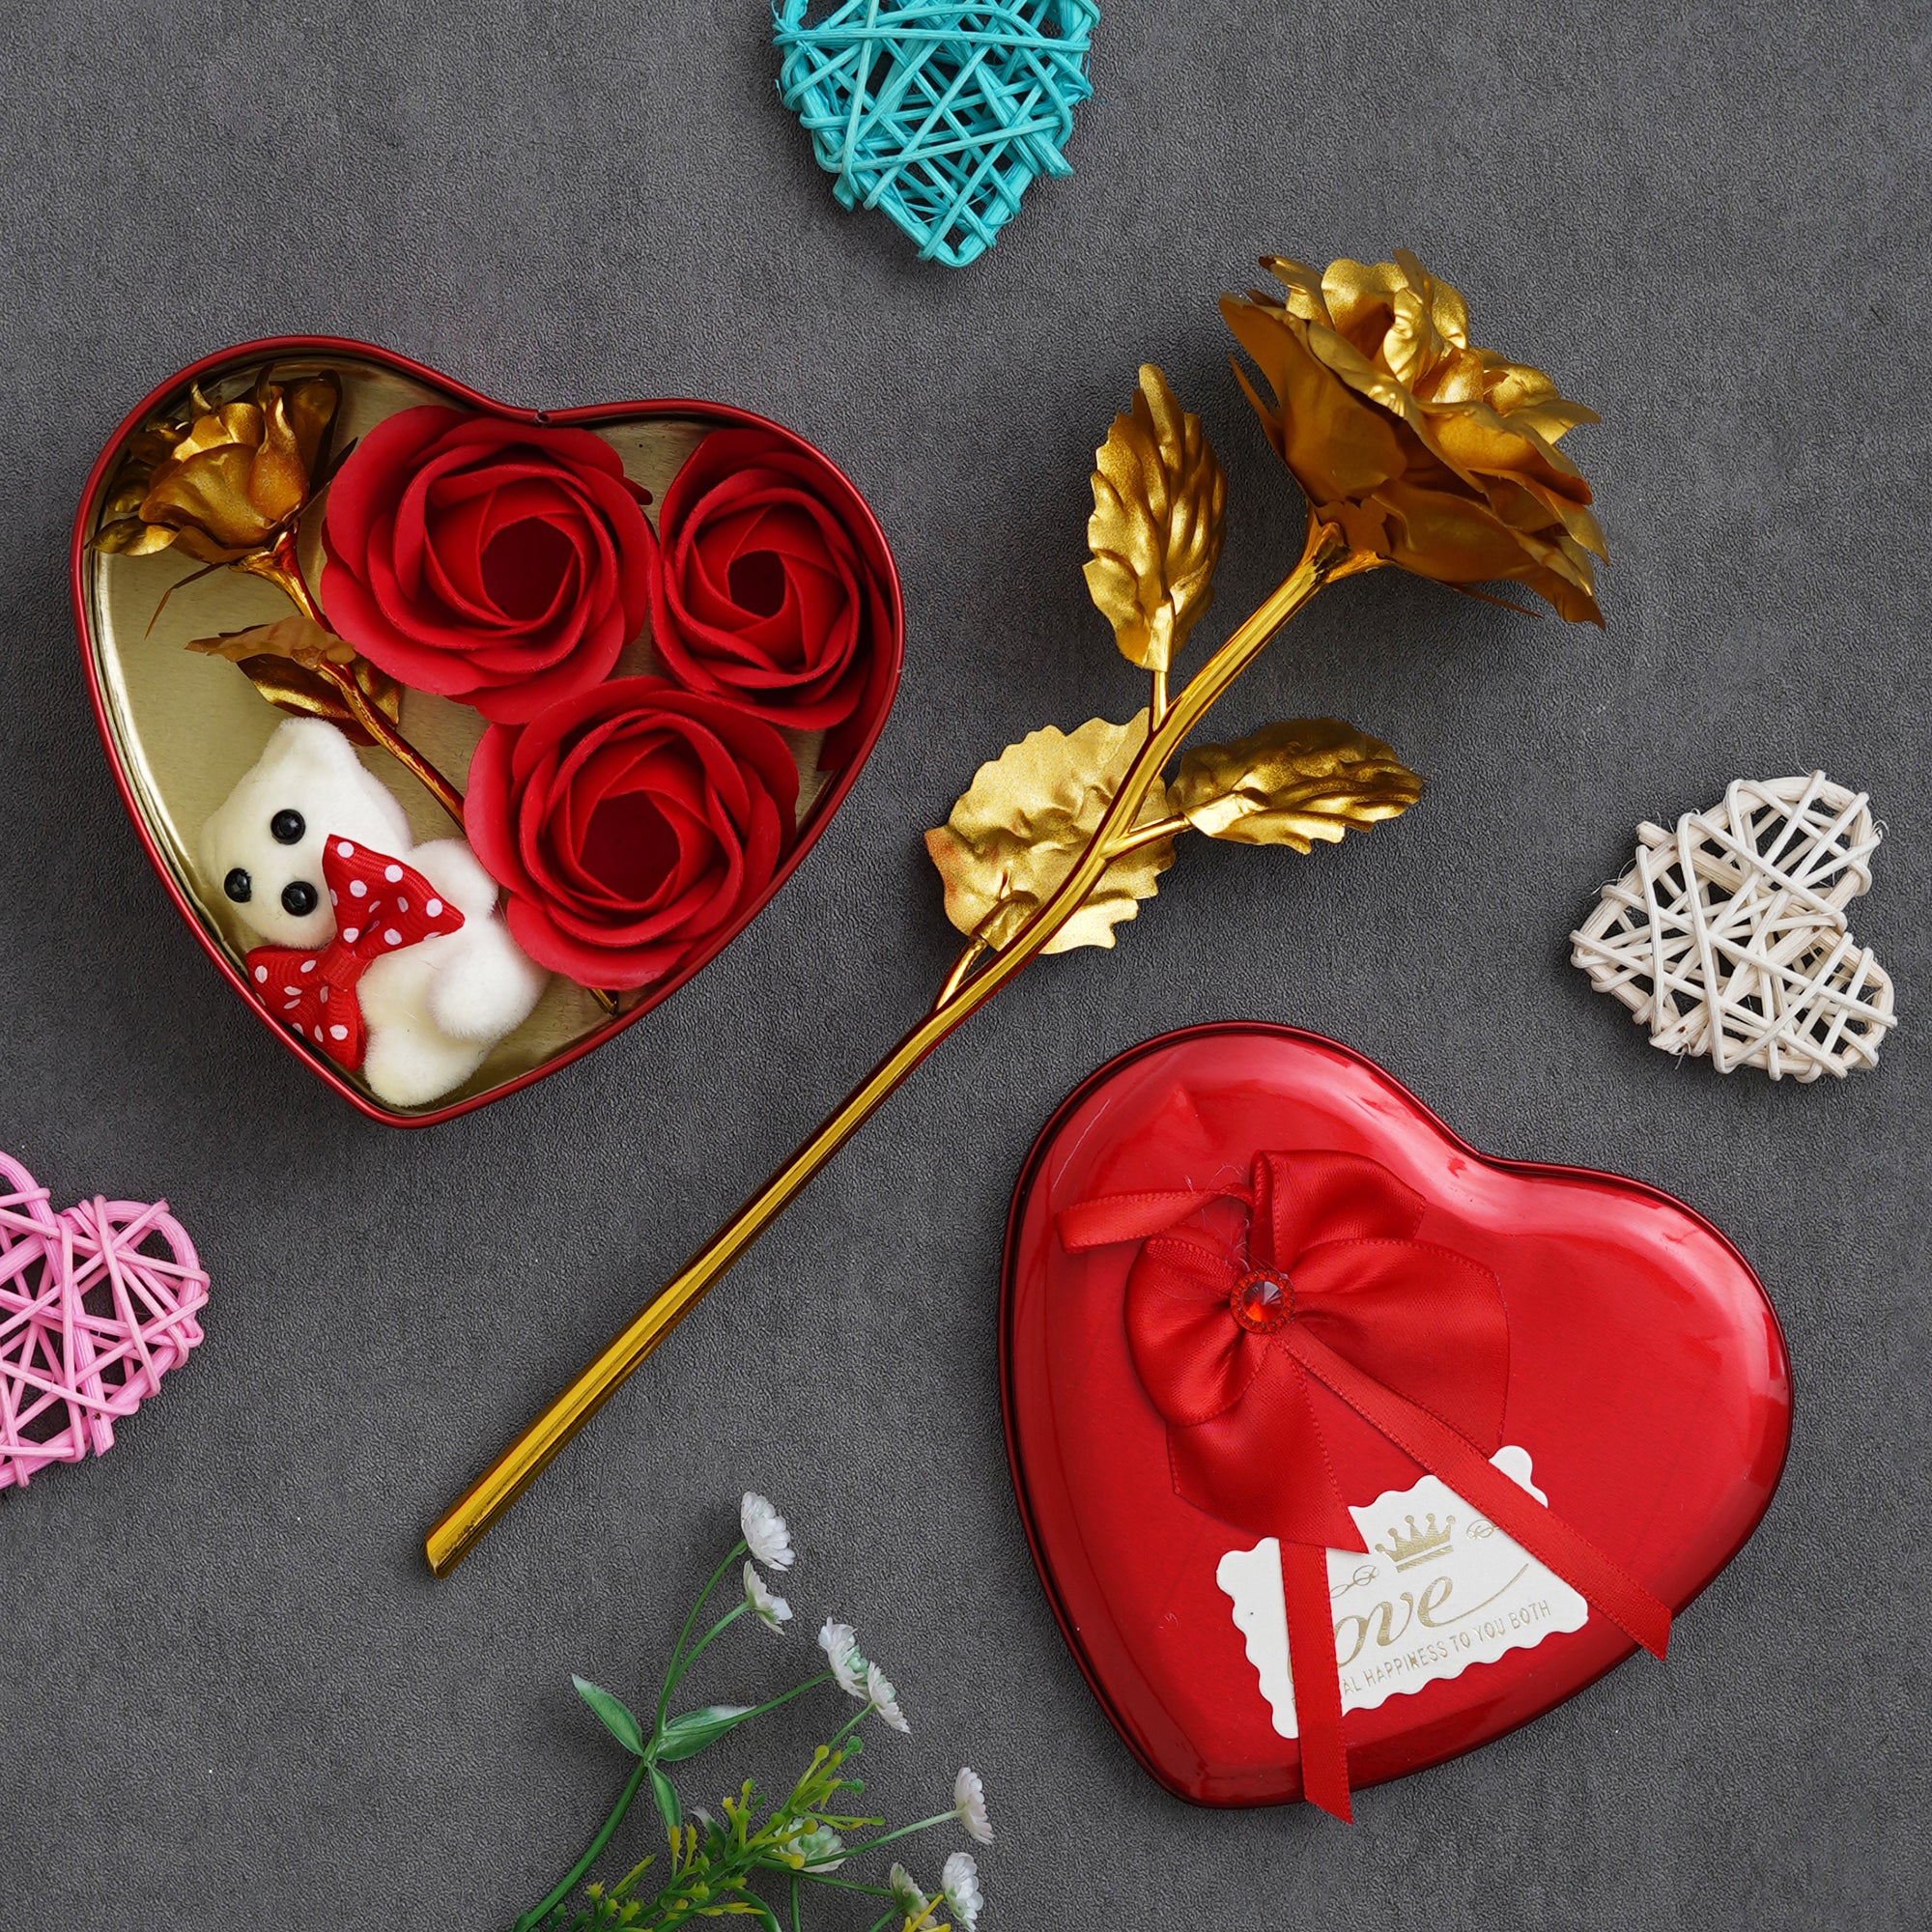 Valentine Combo of Golden Rose Gift Set, Red Heart Shaped Gift Box